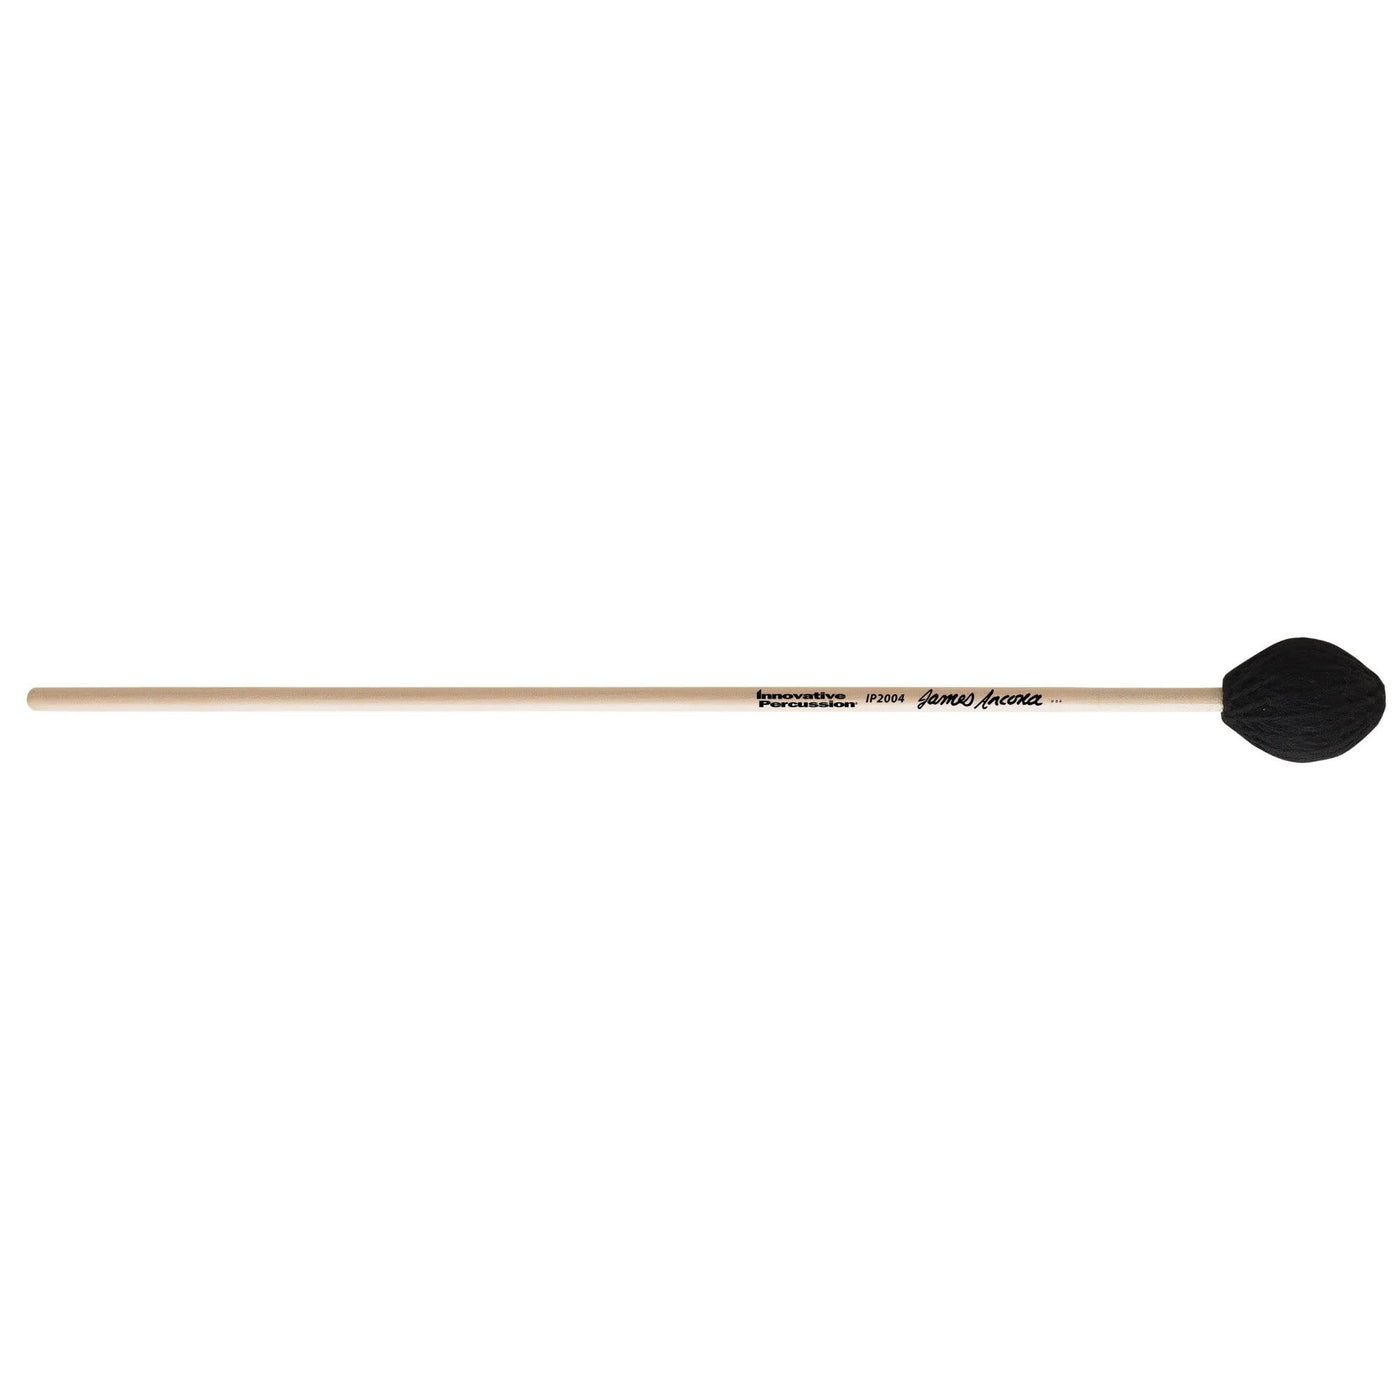 Innovative Percussion IP2004 Keyboard Mallet